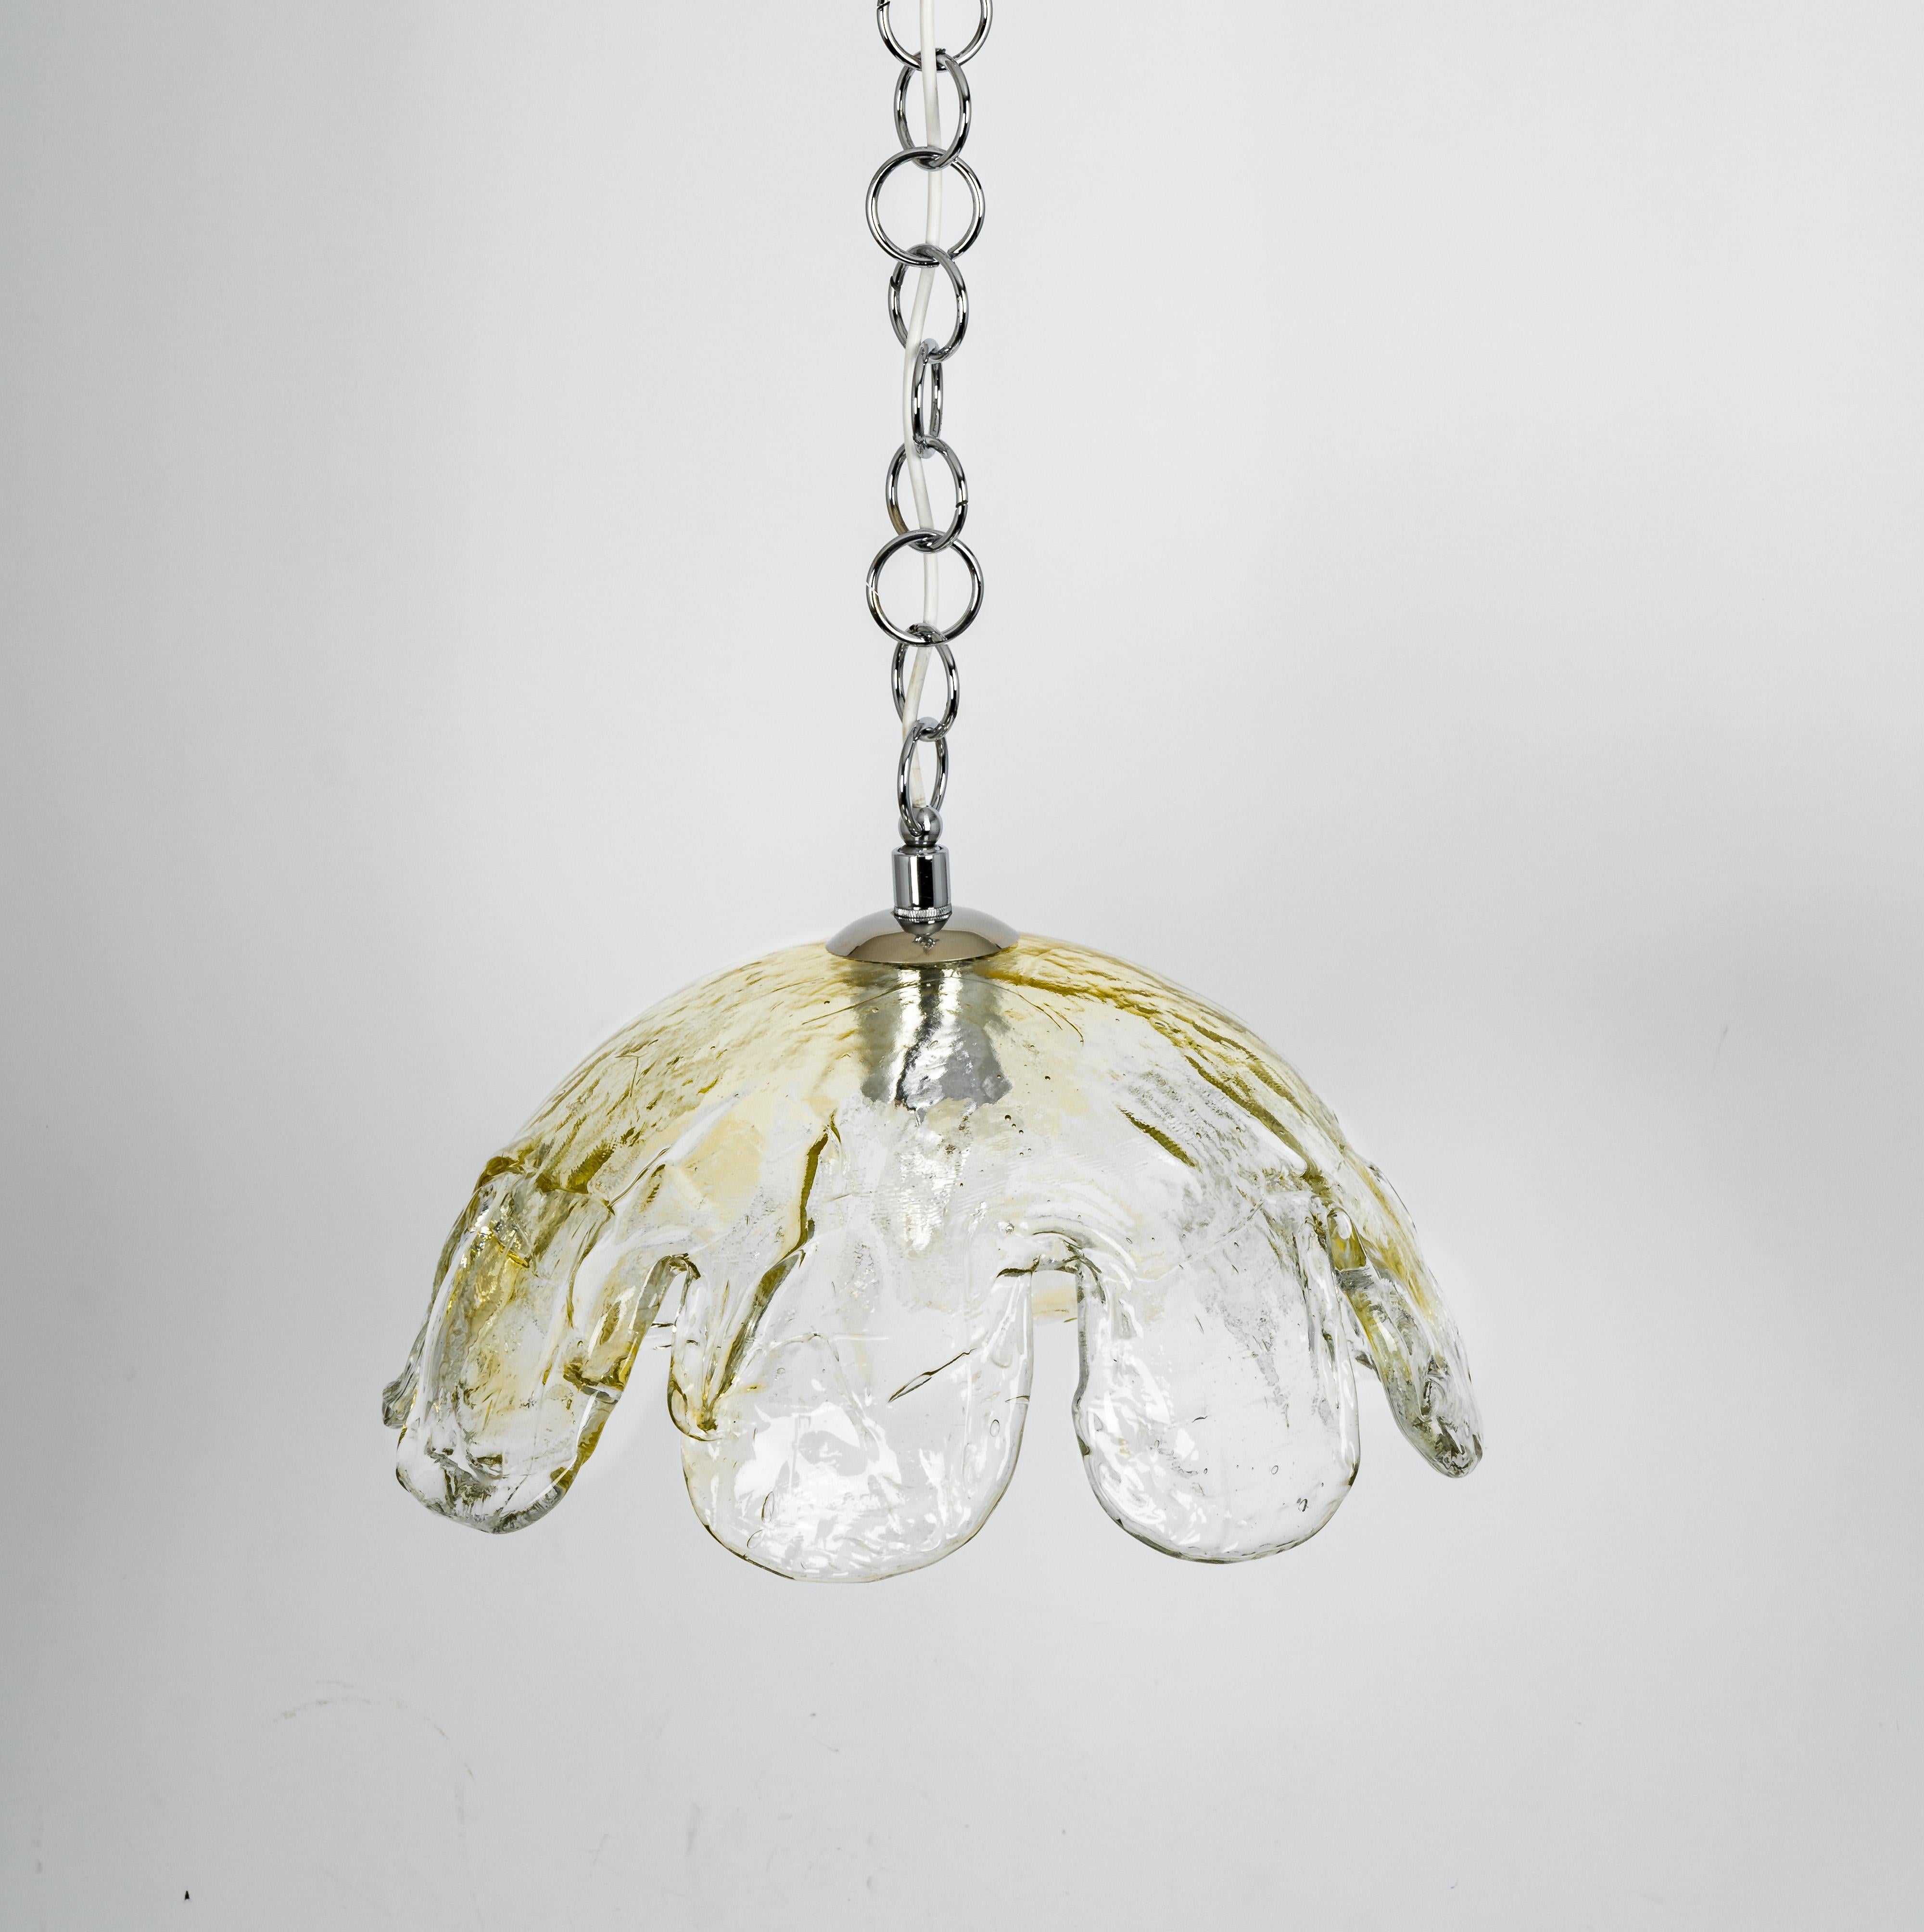 A stunning large Murano Glass pendant light designed by Kaiser, Germany manufactured in the 1960s.
The chandelier is composed of a thick Murano glass element attached to a metal frame.

High quality and in very good condition. Cleaned, well-wired